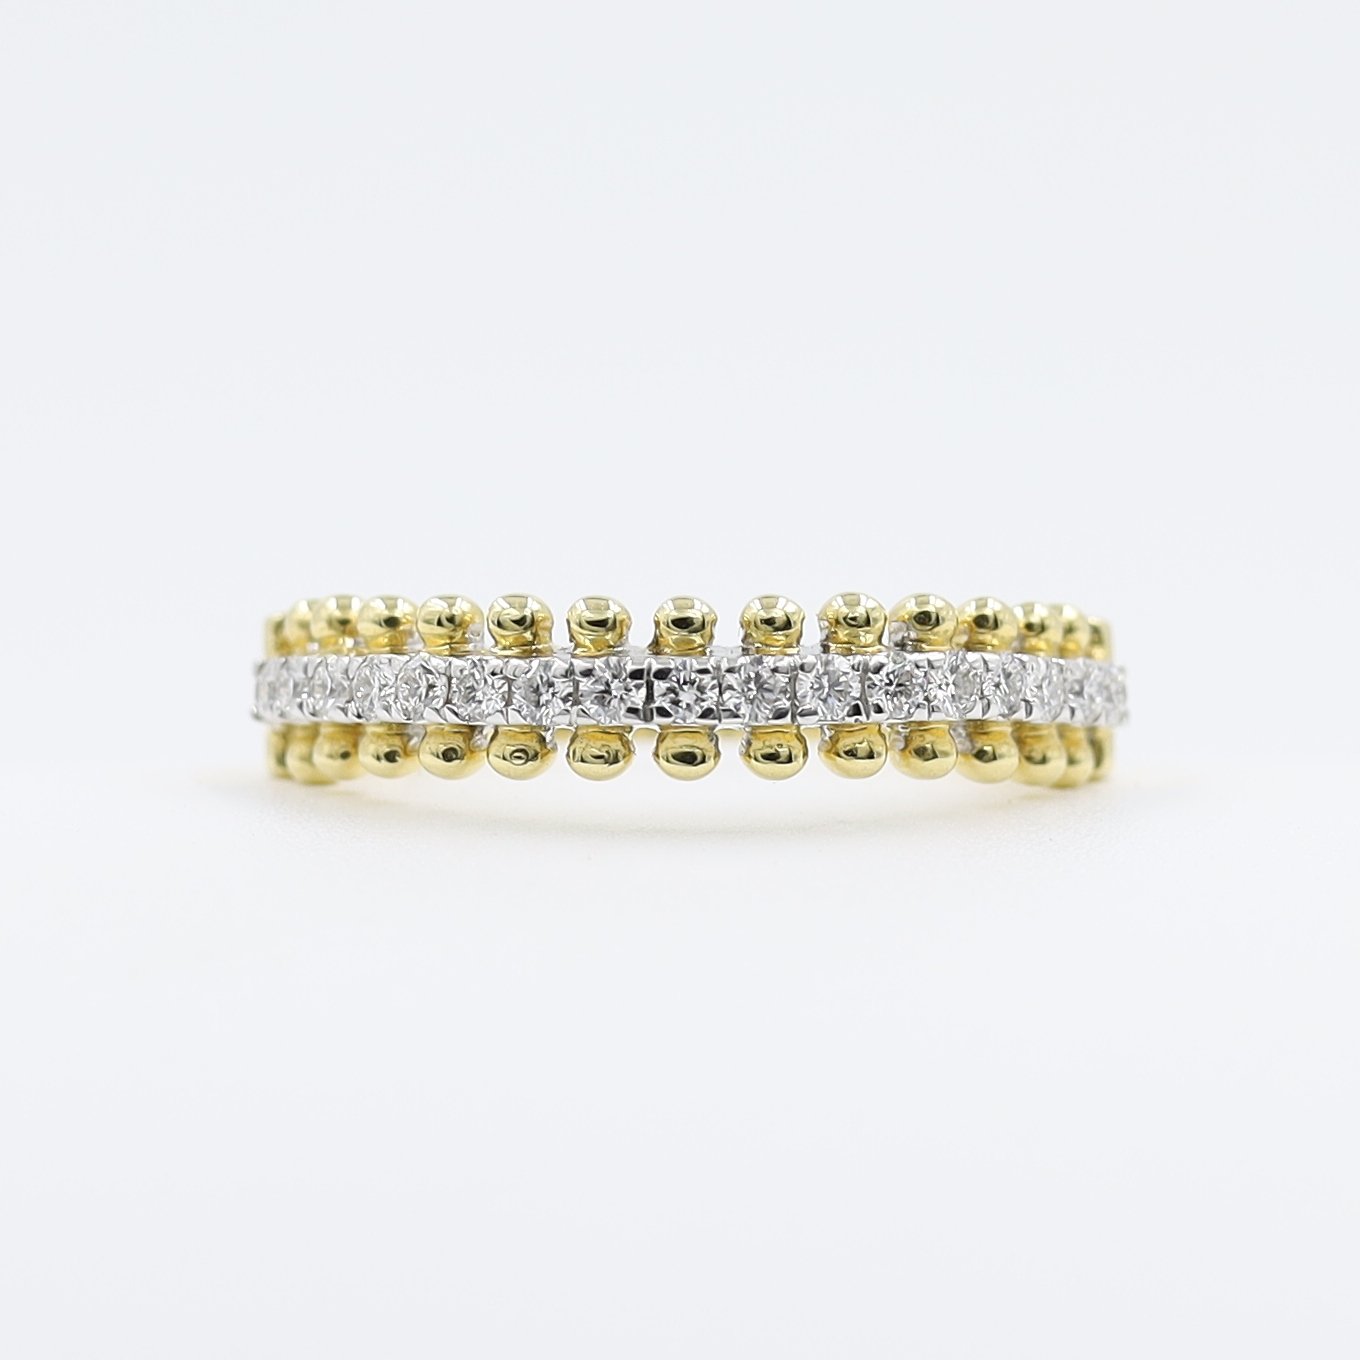 14kt Yellow Gold Ring With Diamond Line On It